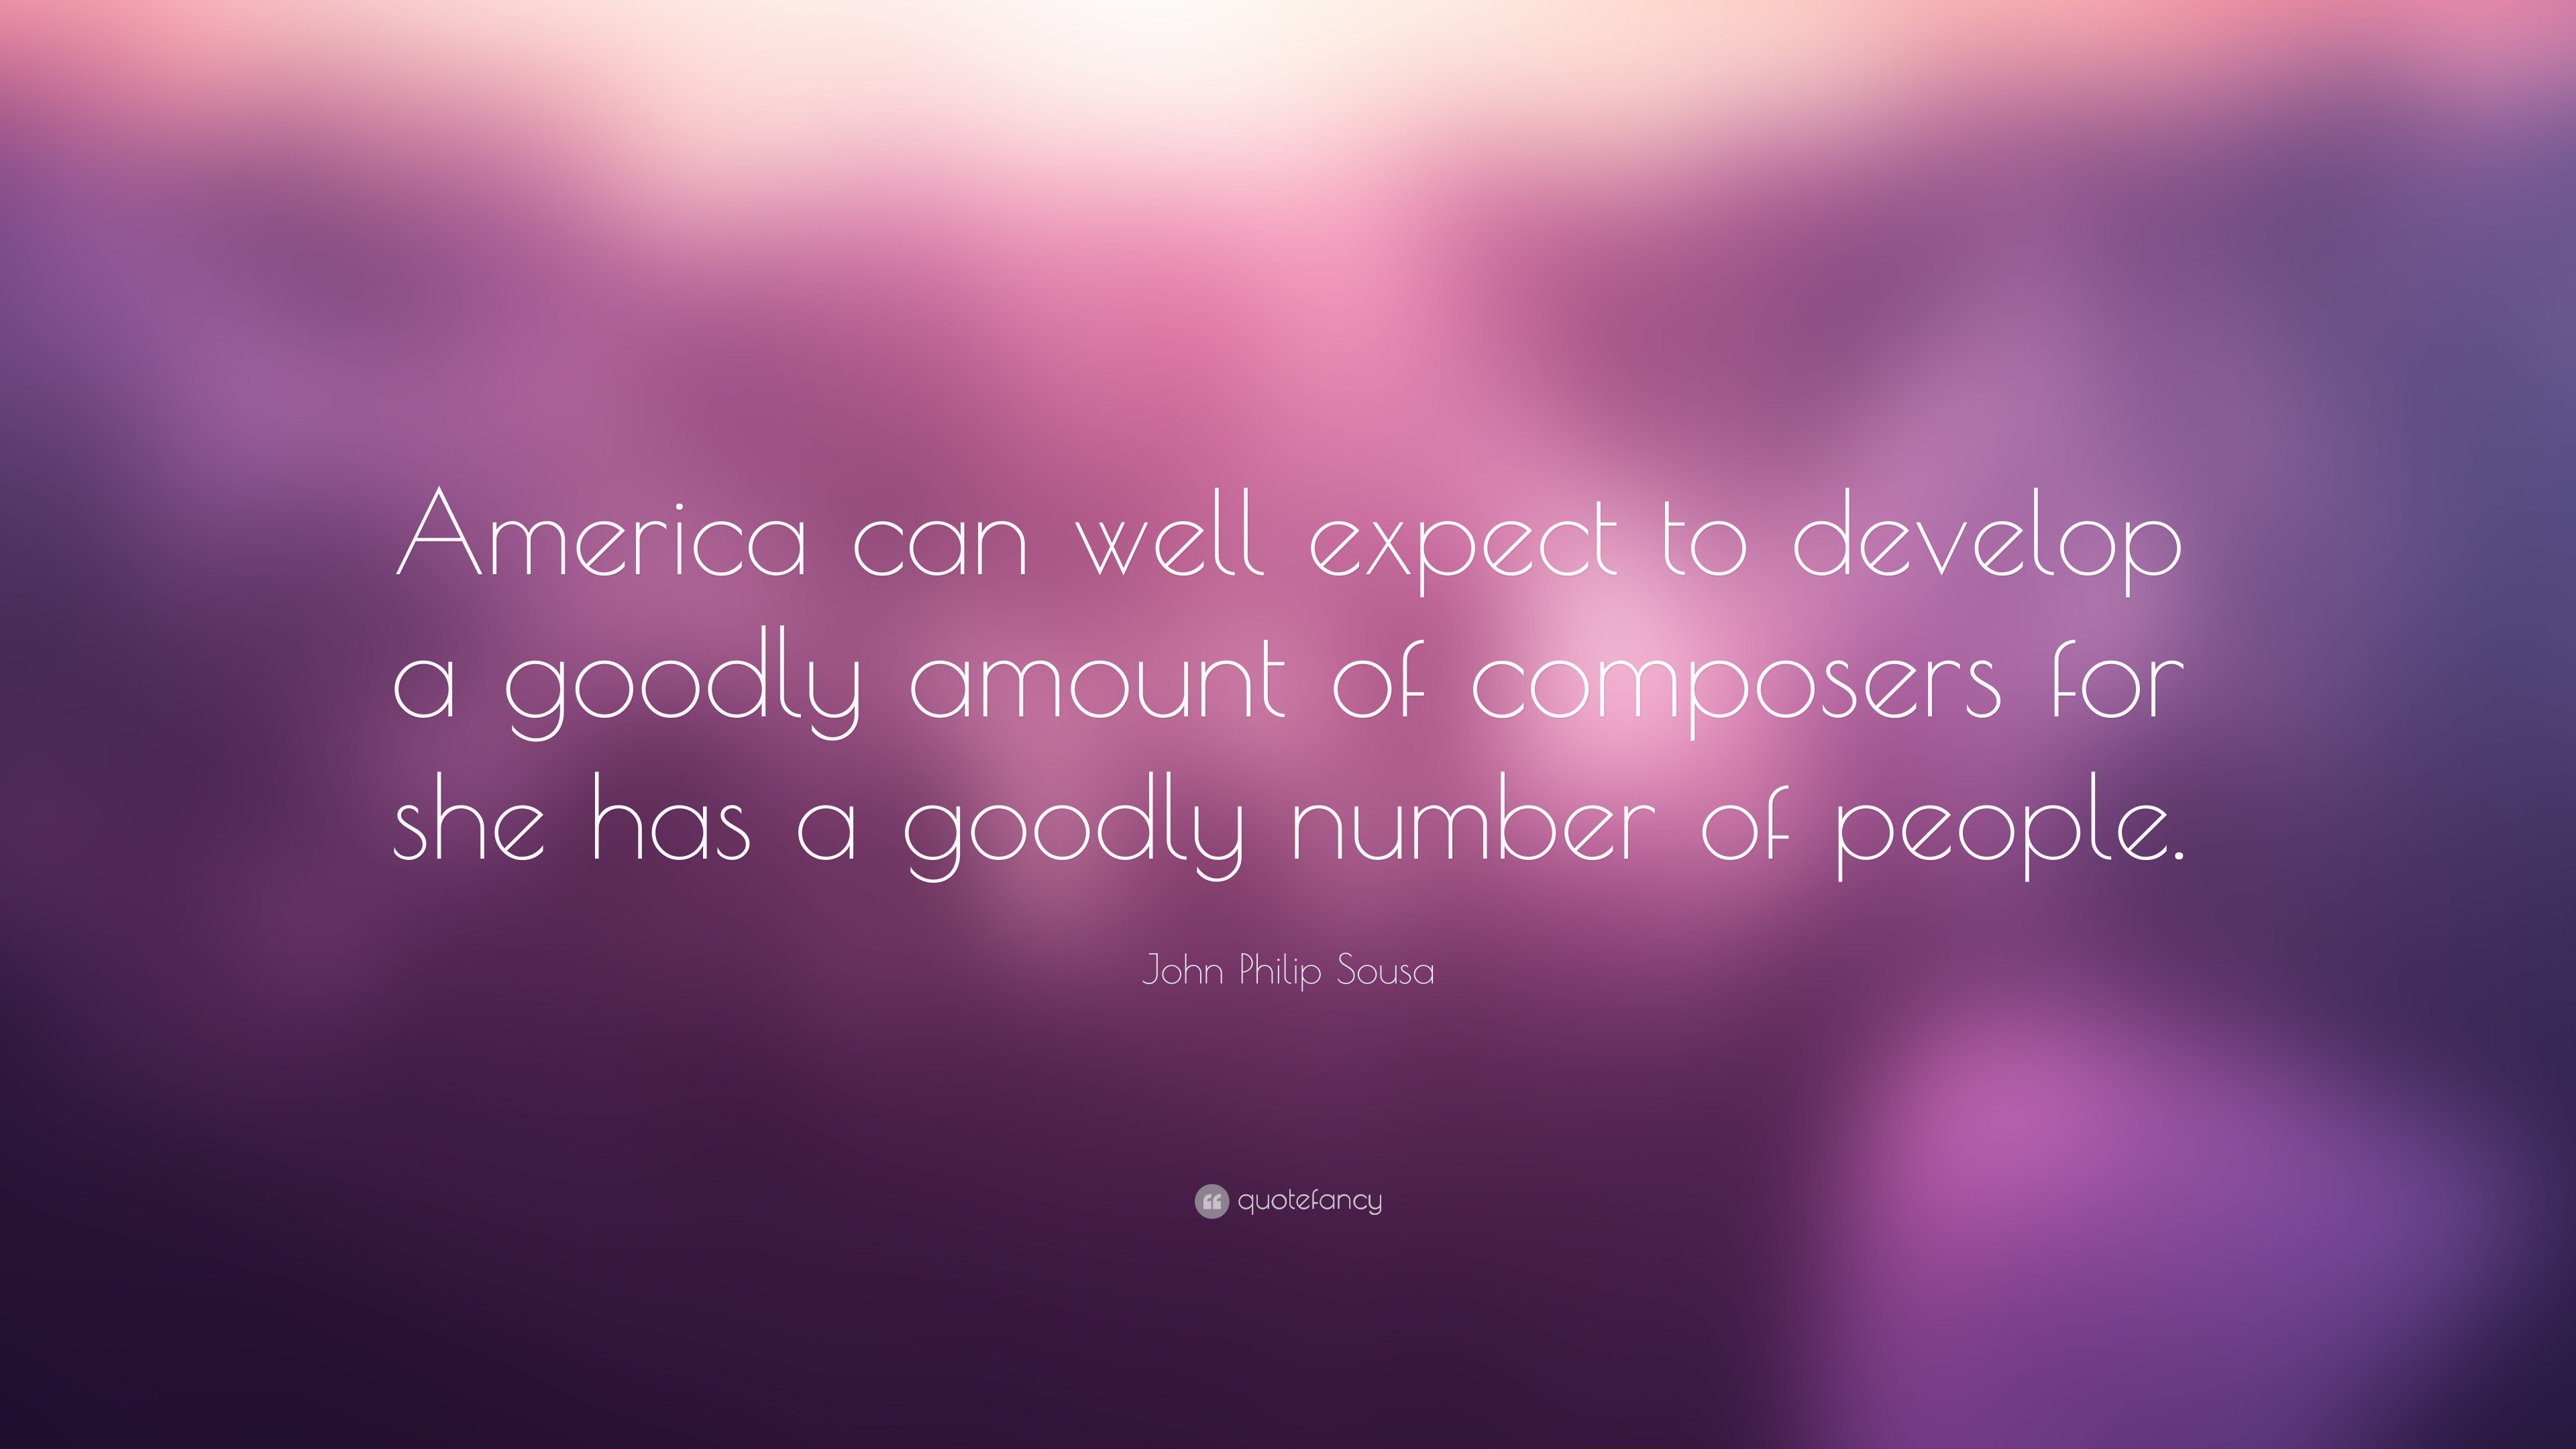 John Philip Sousa Quote: “America can well expect to develop a goodly